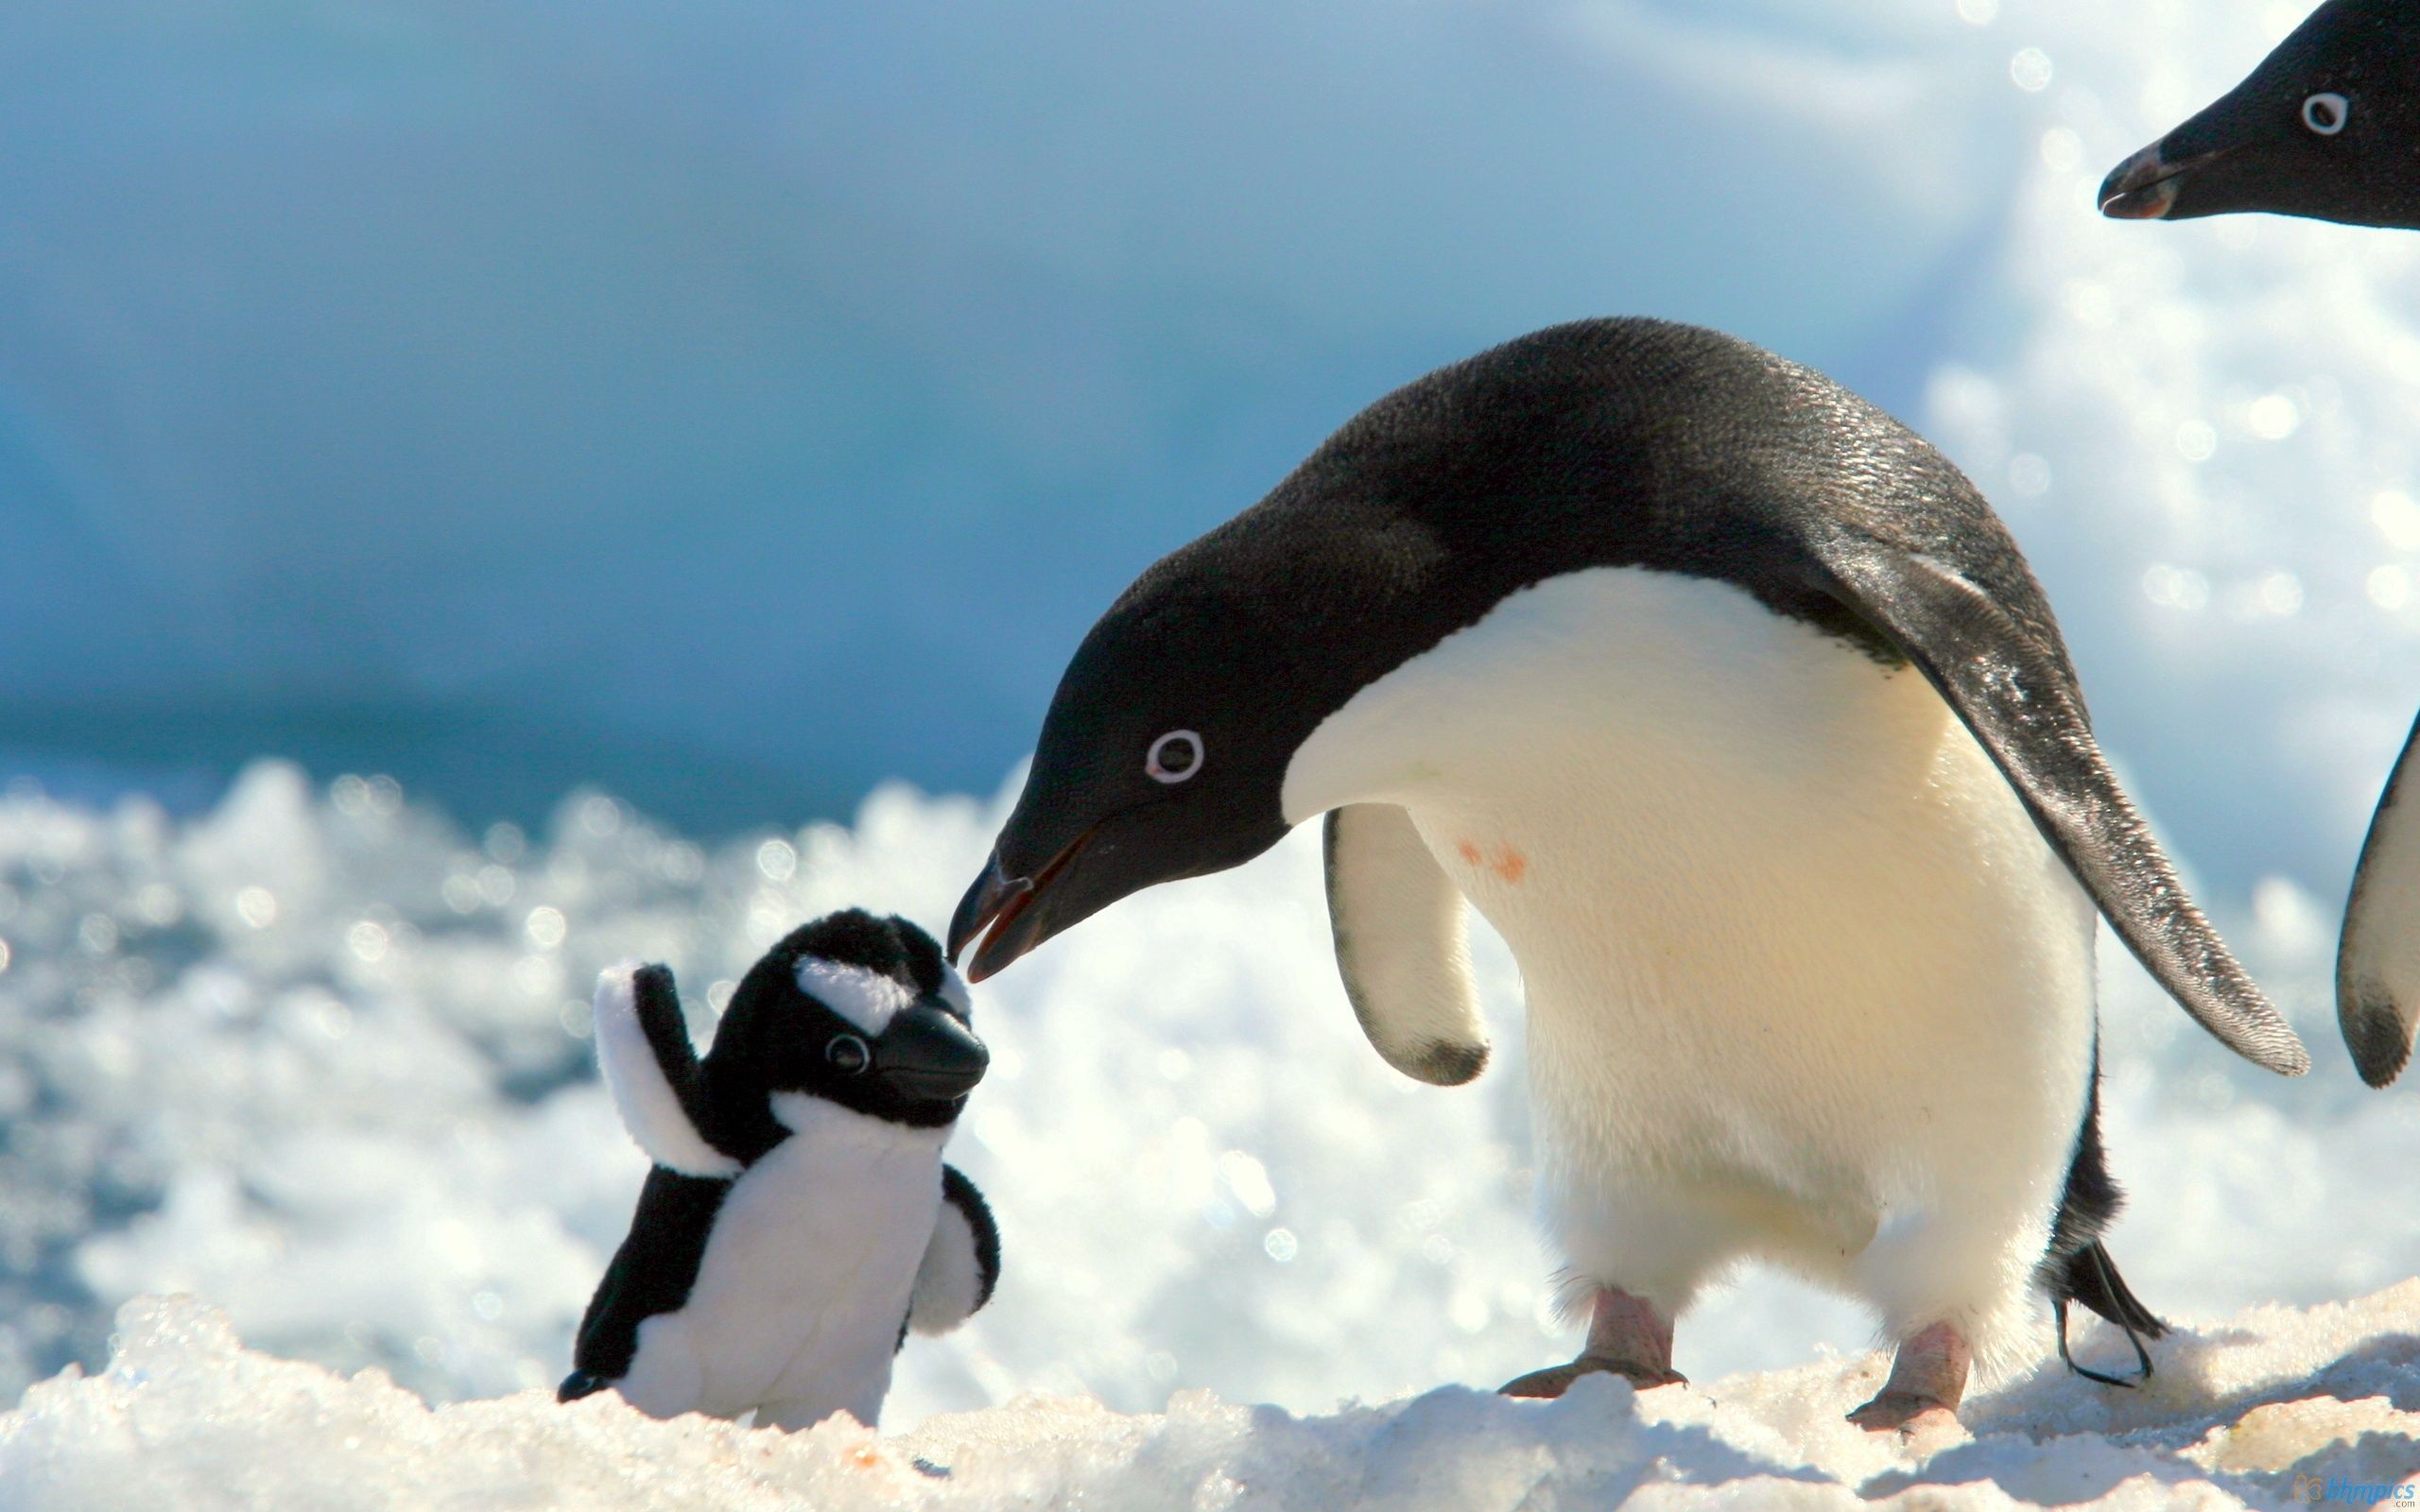 care, animals, pinguins, snow, young, joey iphone wallpaper